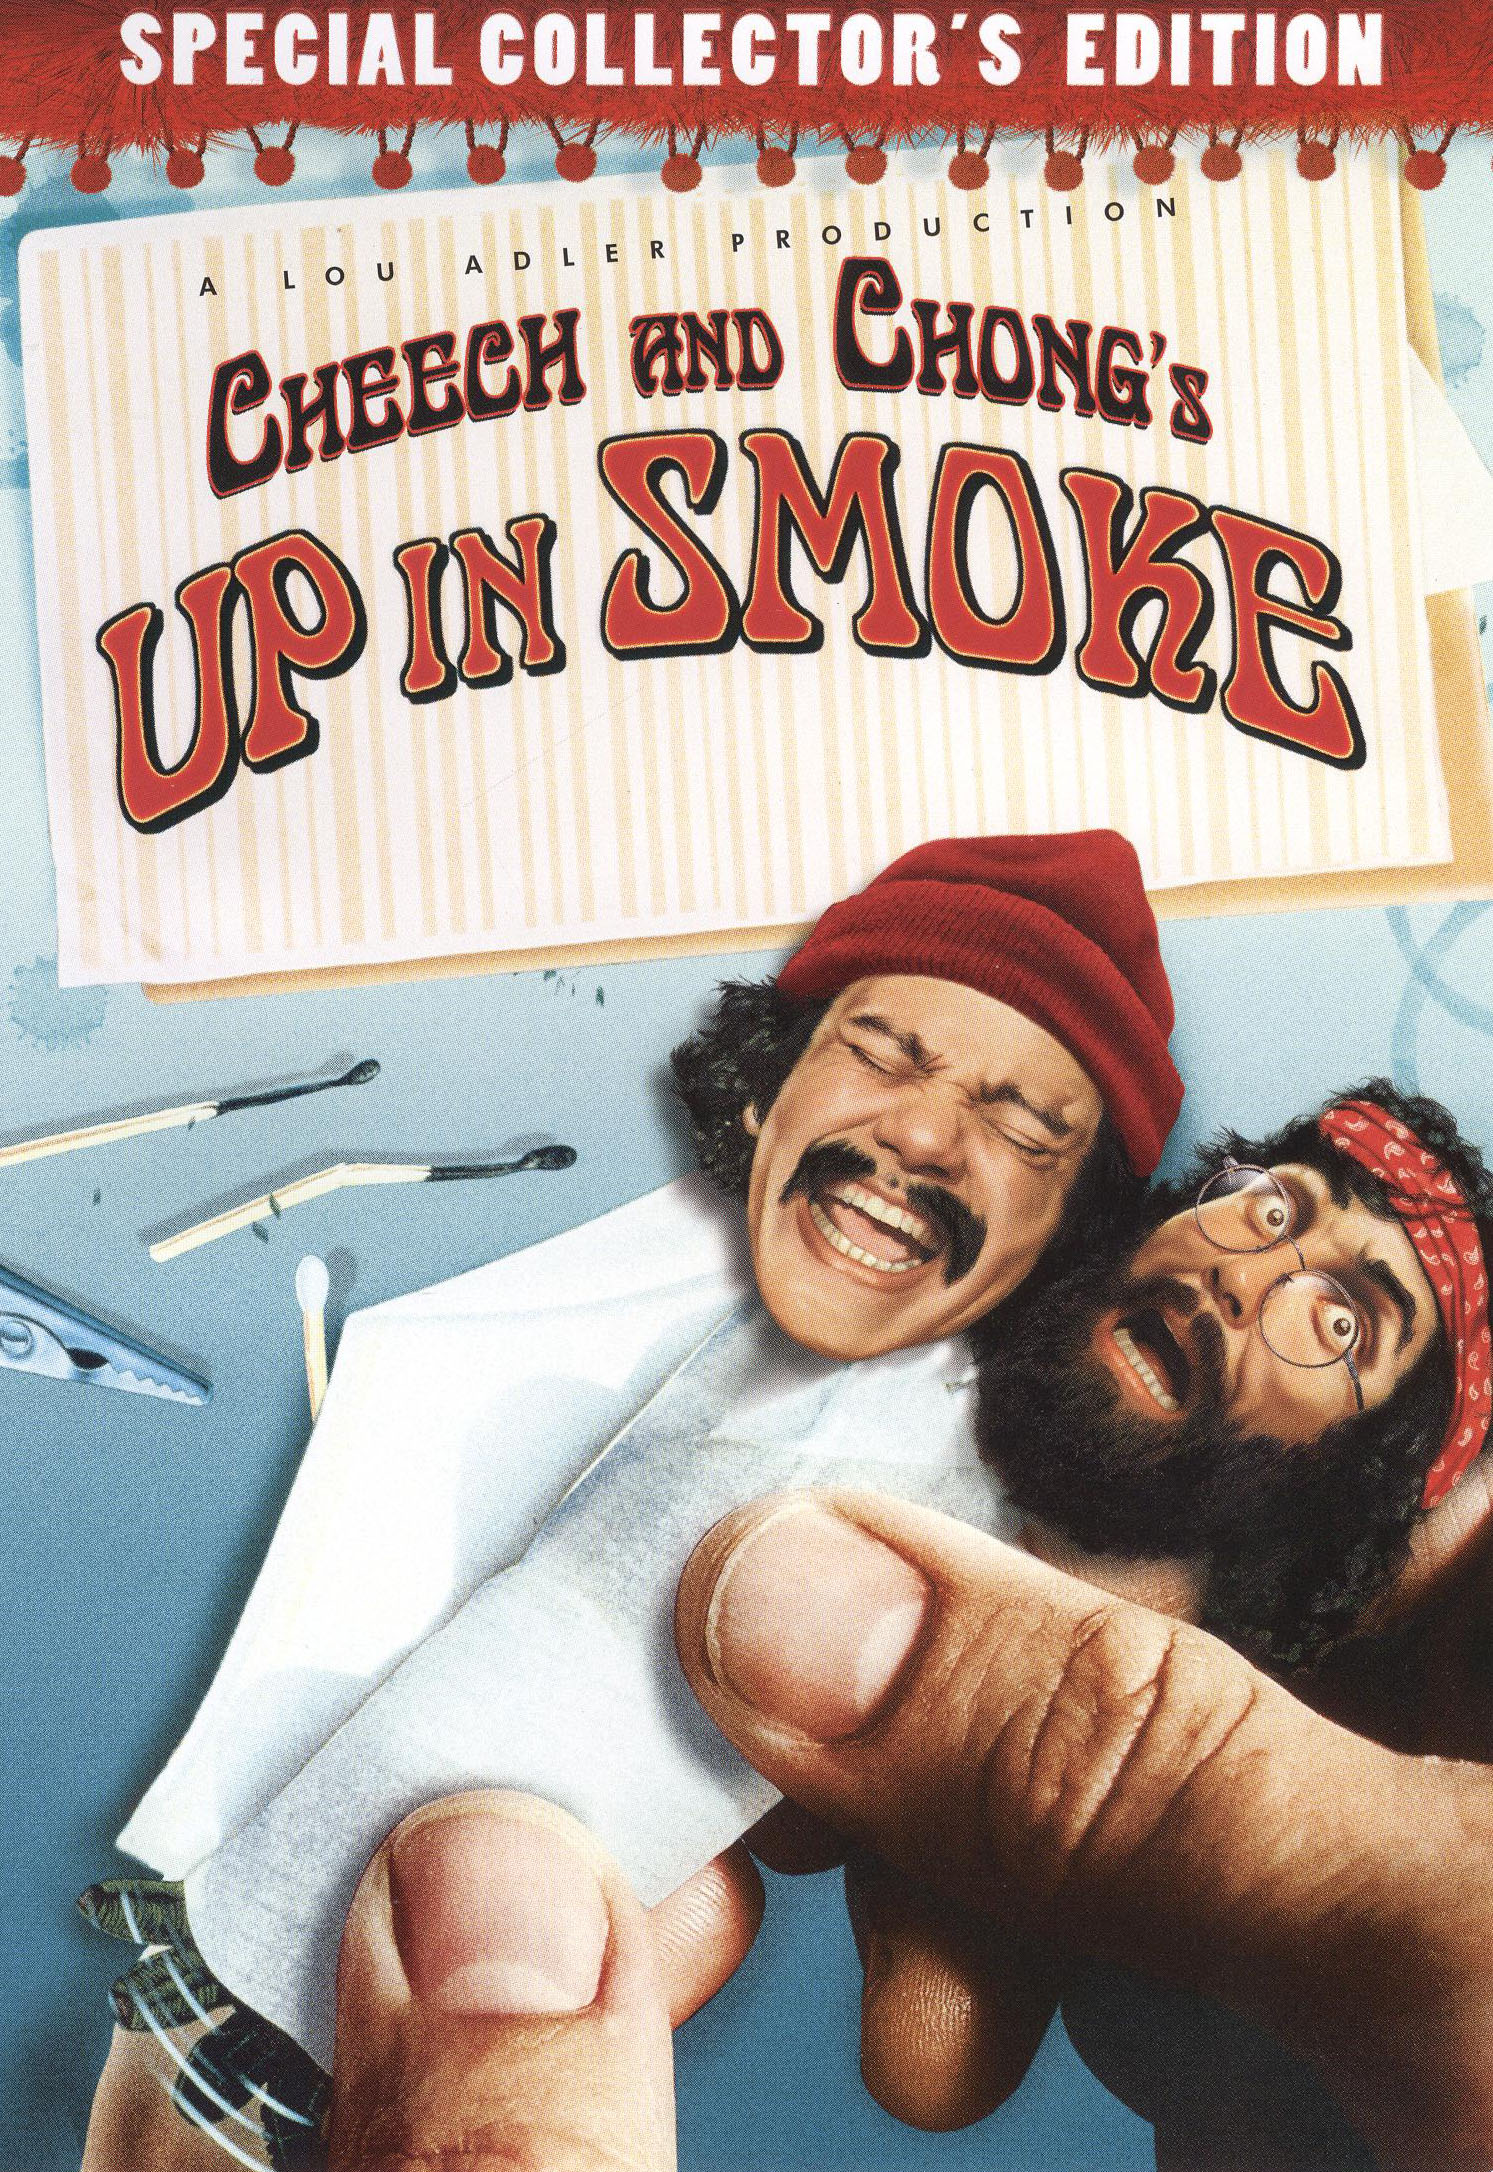 Amazing Cheech And Chong Quotes in the world Check it out now 